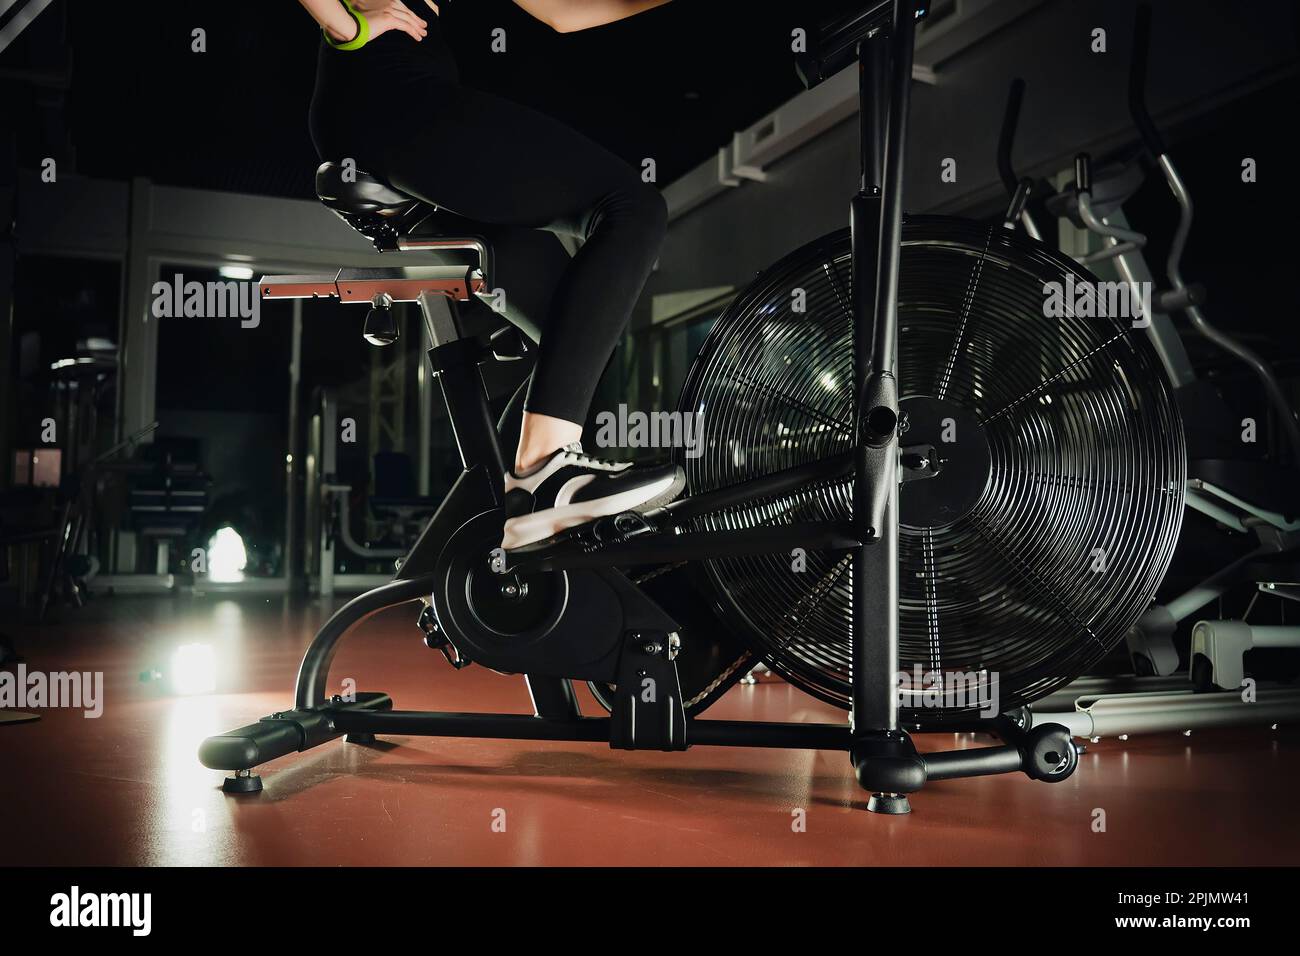 Closeup of spinning wheel on exercise bike on spin bicycle fitness workout. Woman training on stationary bike watching online video class for exercisi Stock Photo